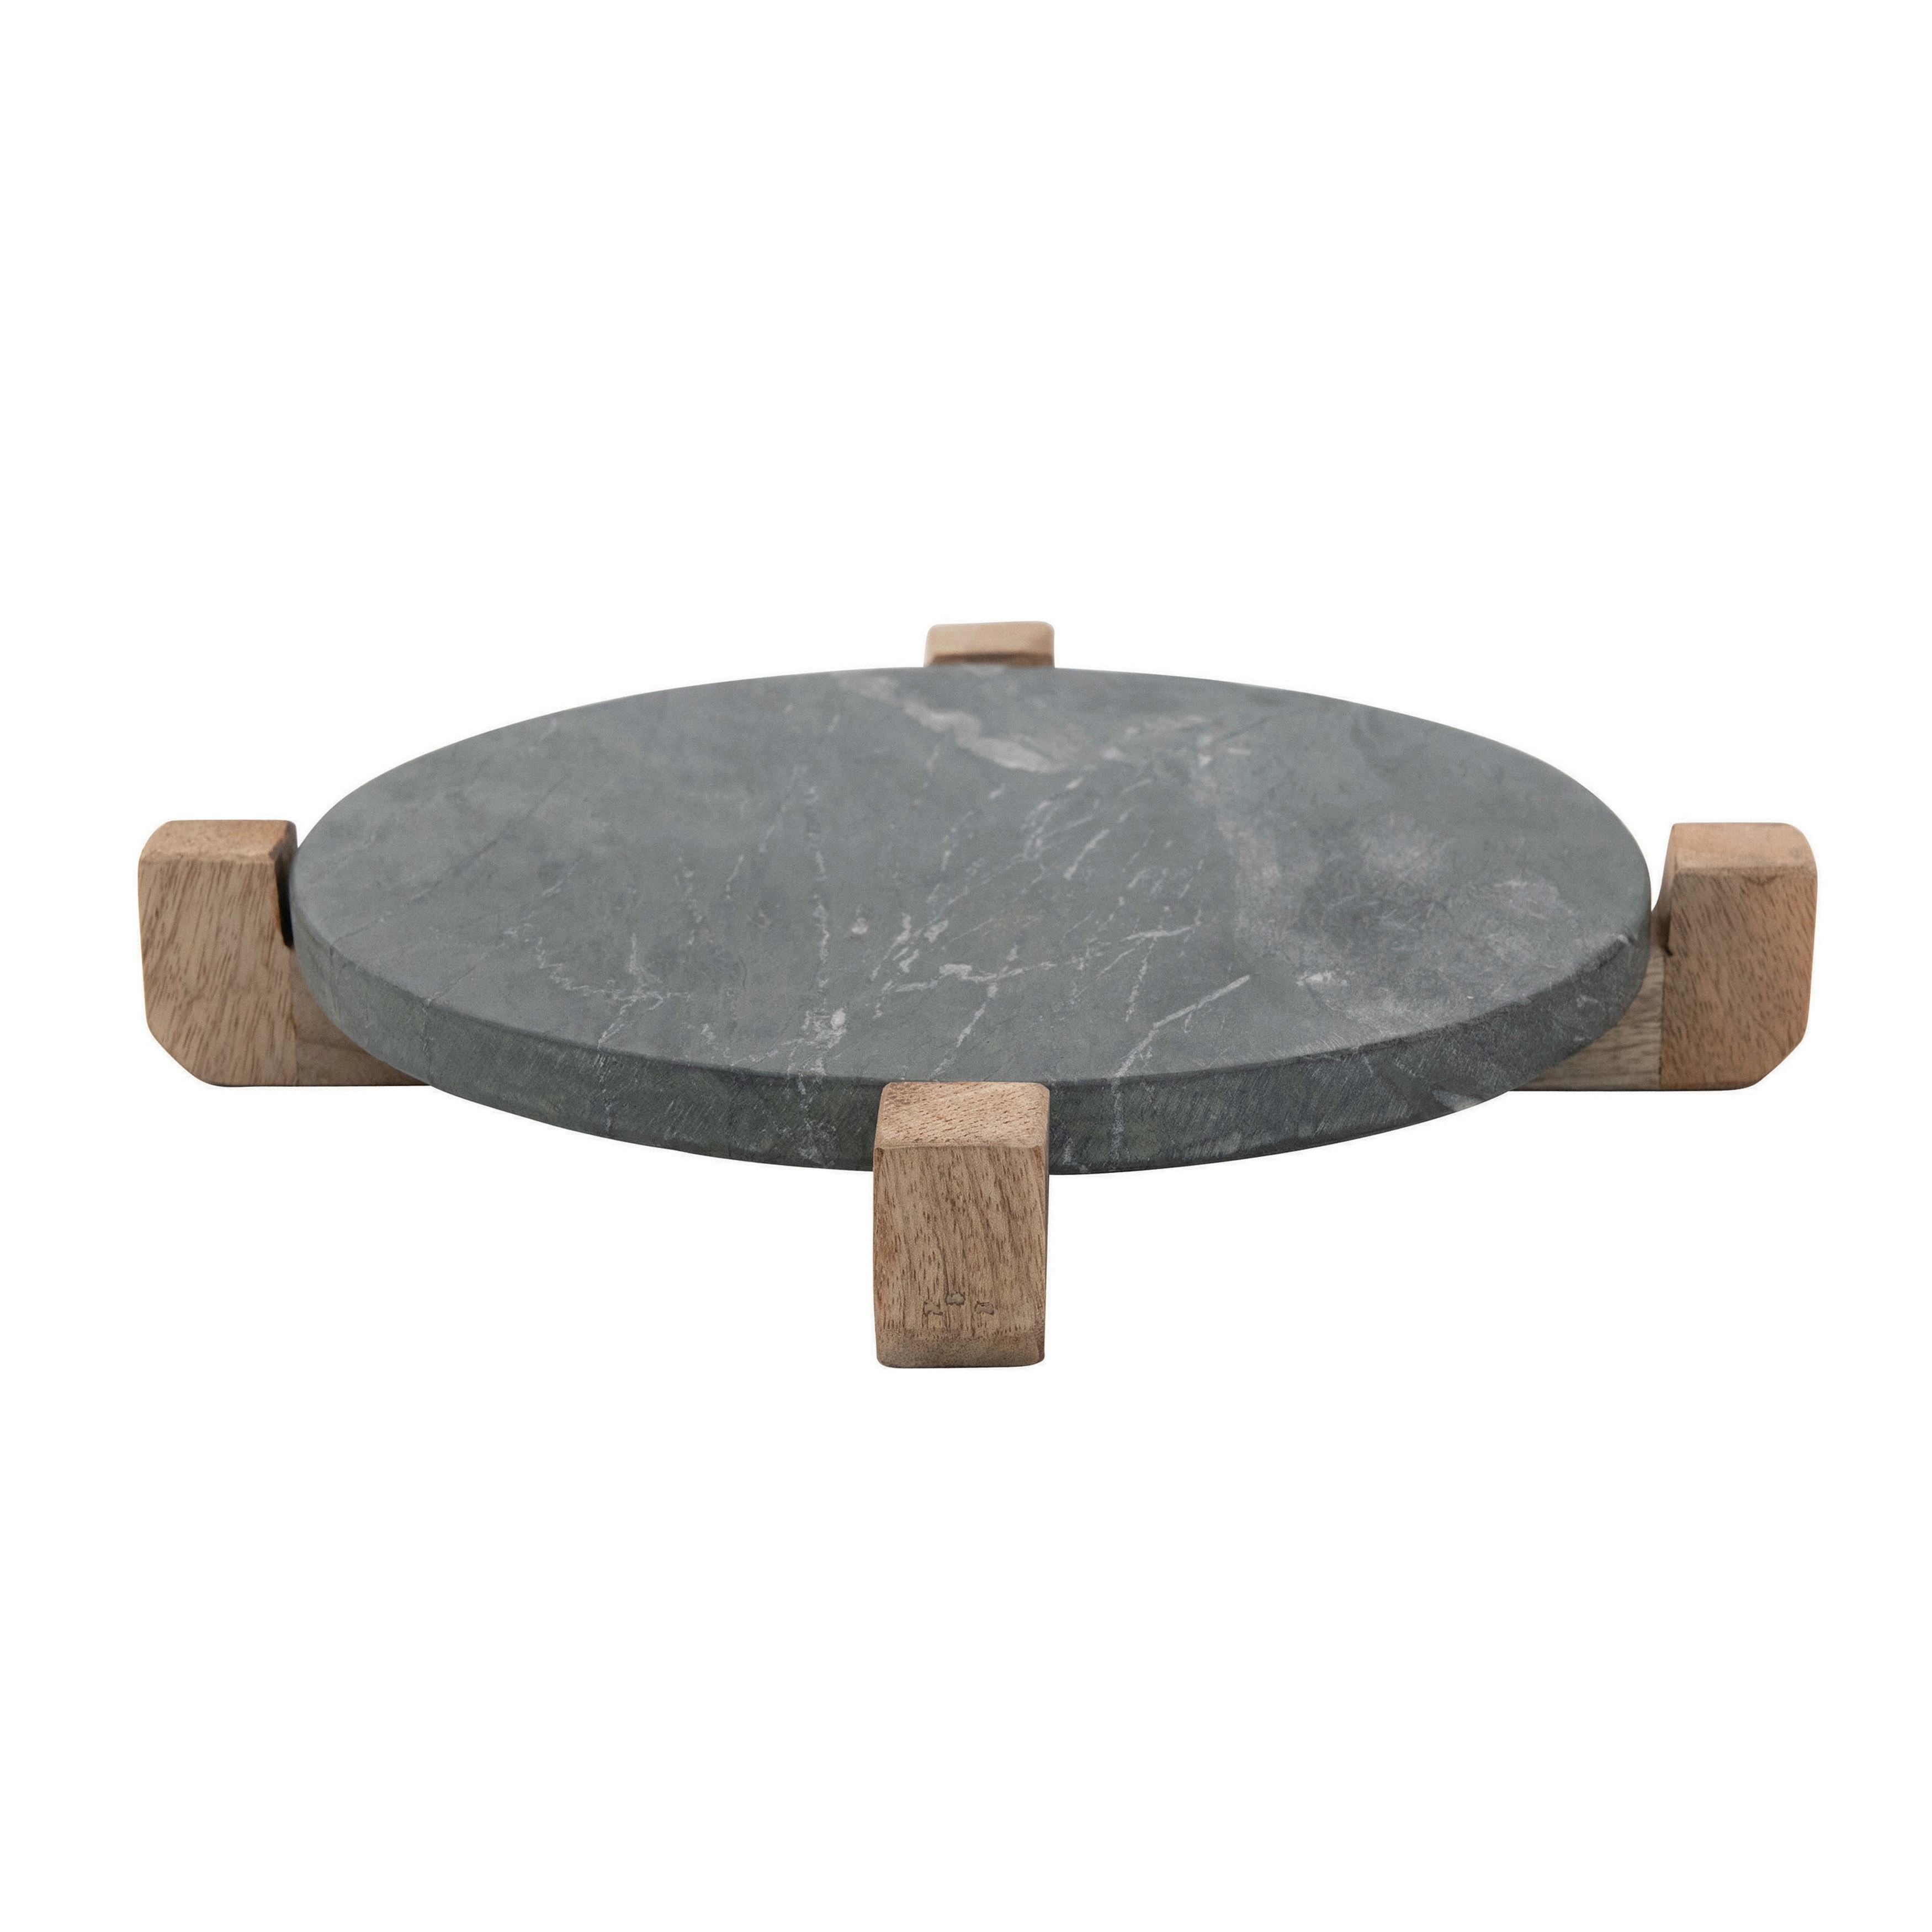 https://ak1.ostkcdn.com/images/products/is/images/direct/781a753f1109f8971895fc3a570364106c5a879f/Marble-Serving-Board-with-Mango-Wood-Stand.jpg